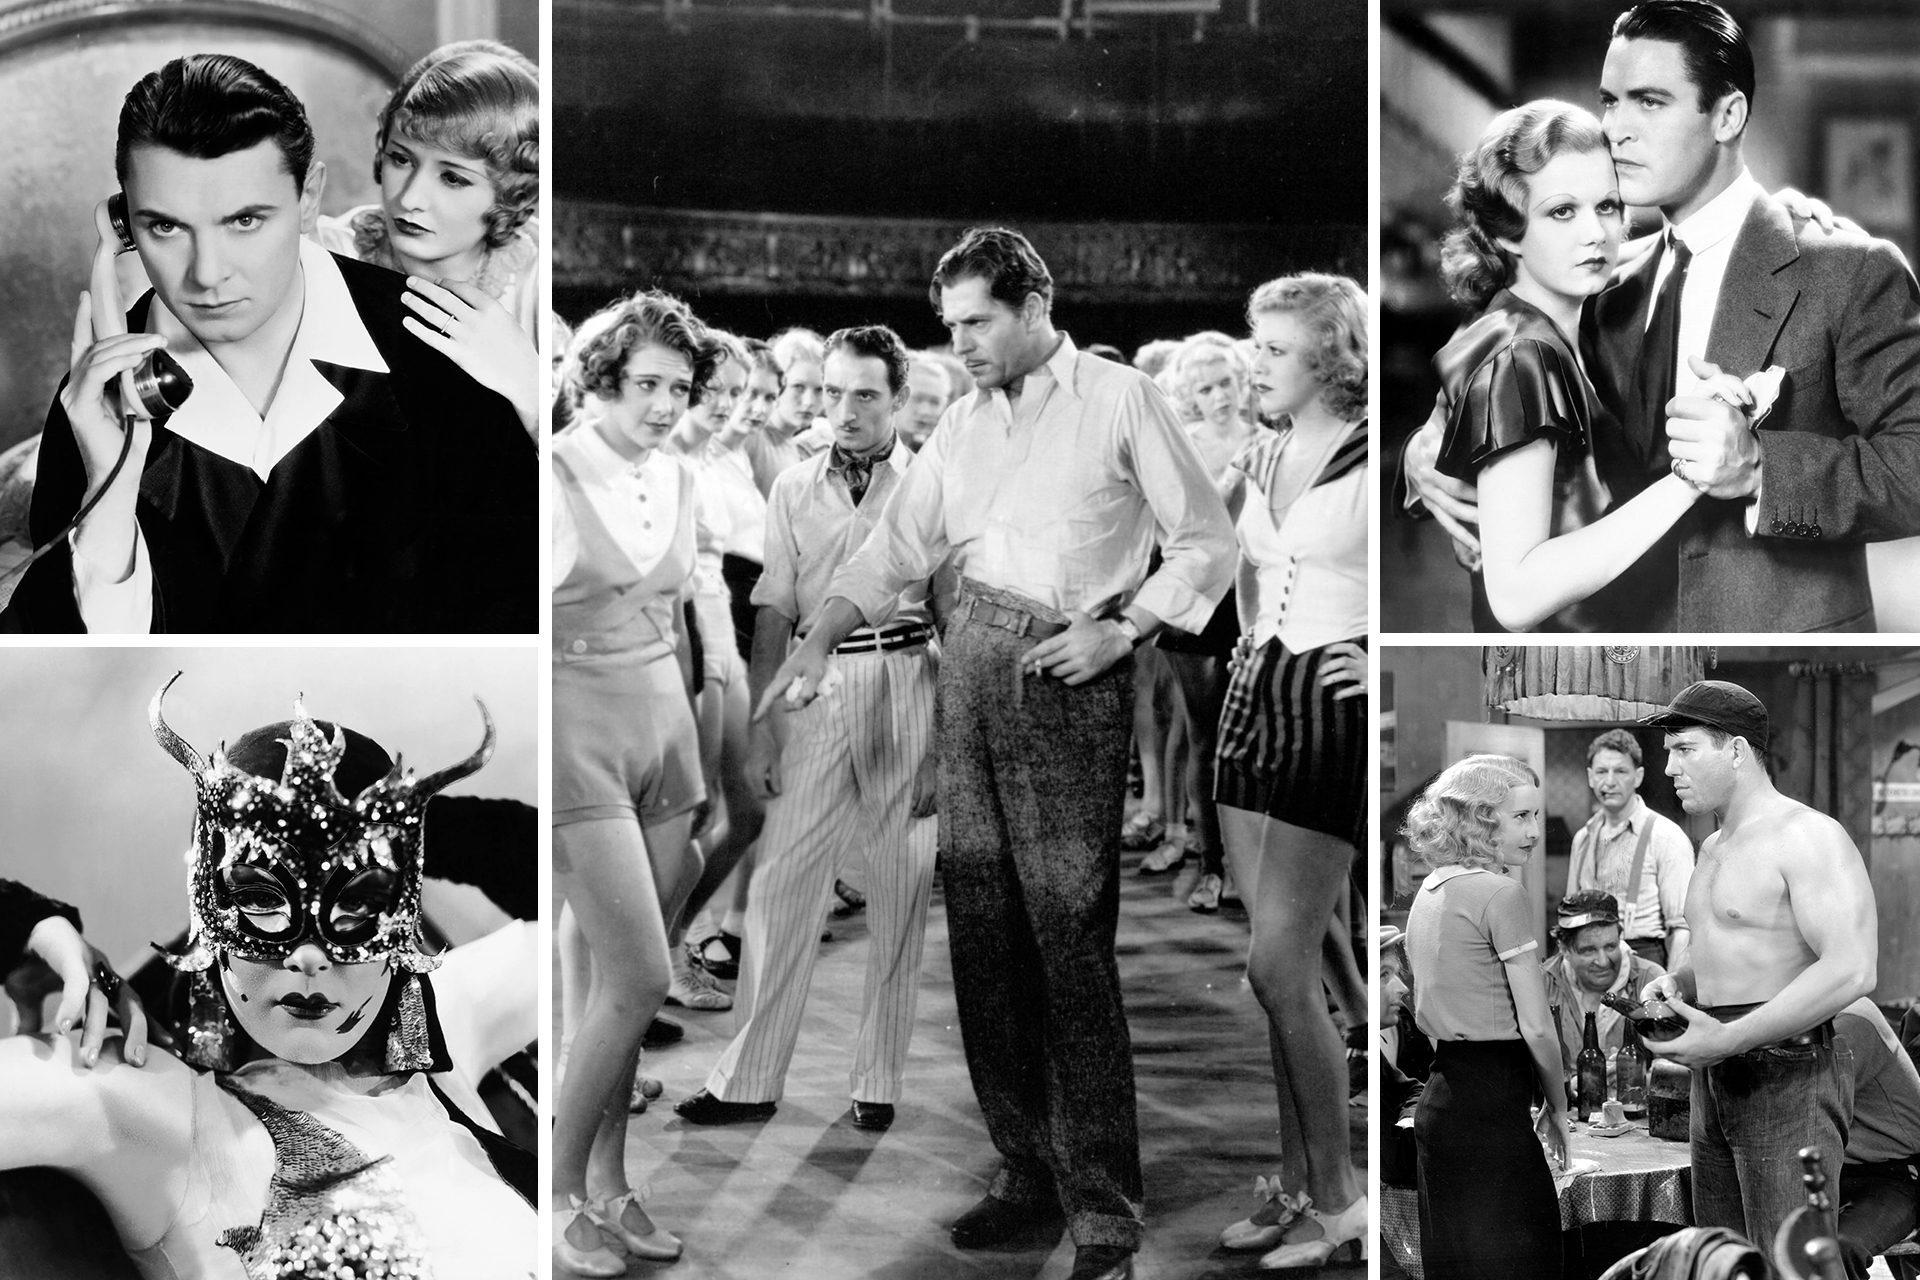 Risque Movies Of 1930s